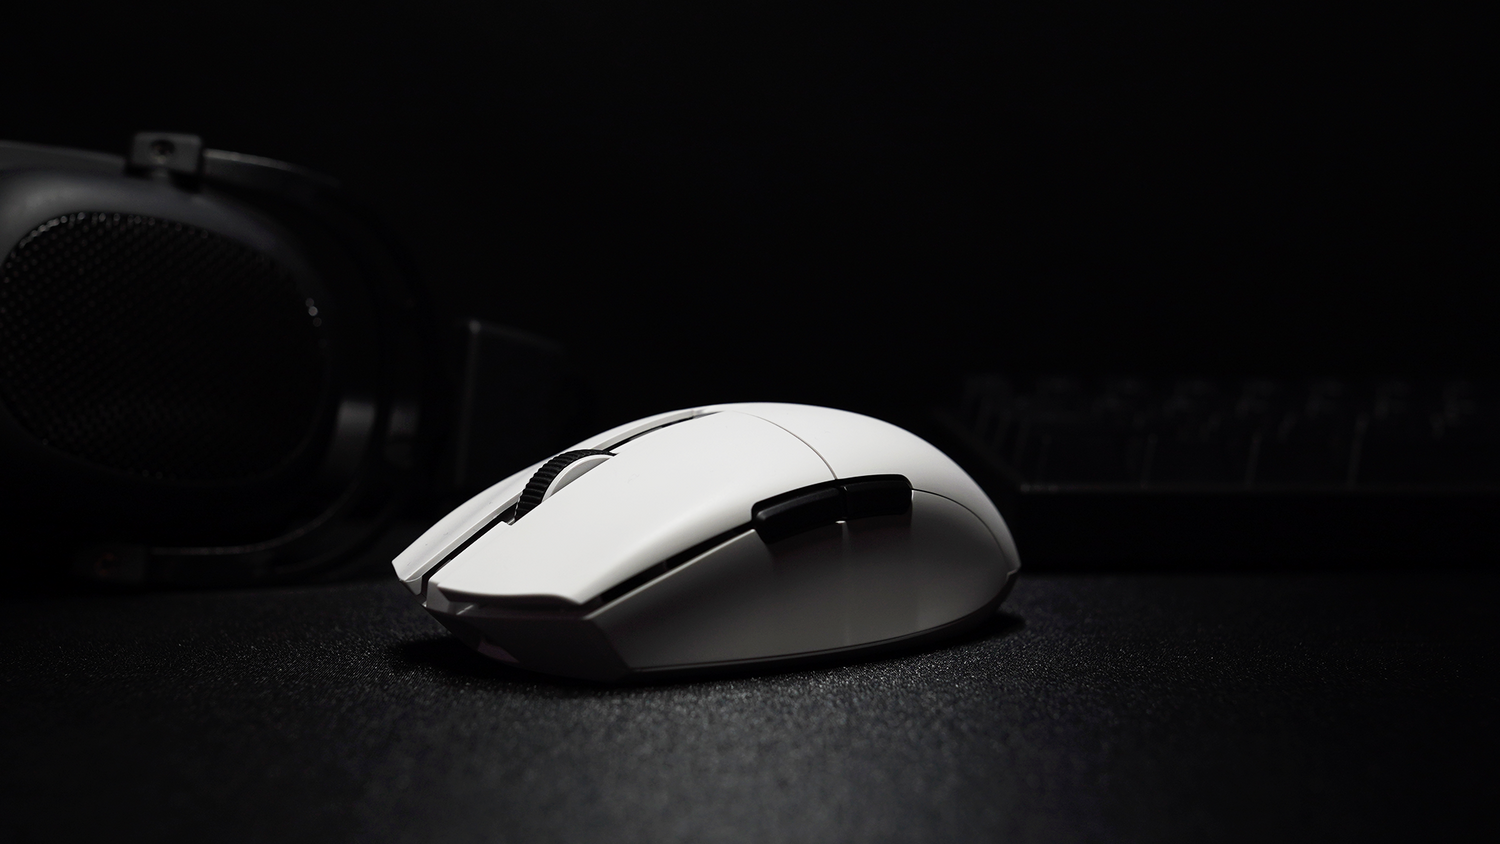 Egg-Shaped Mouse: The Ergonomic and Accurate Choice for Gamers